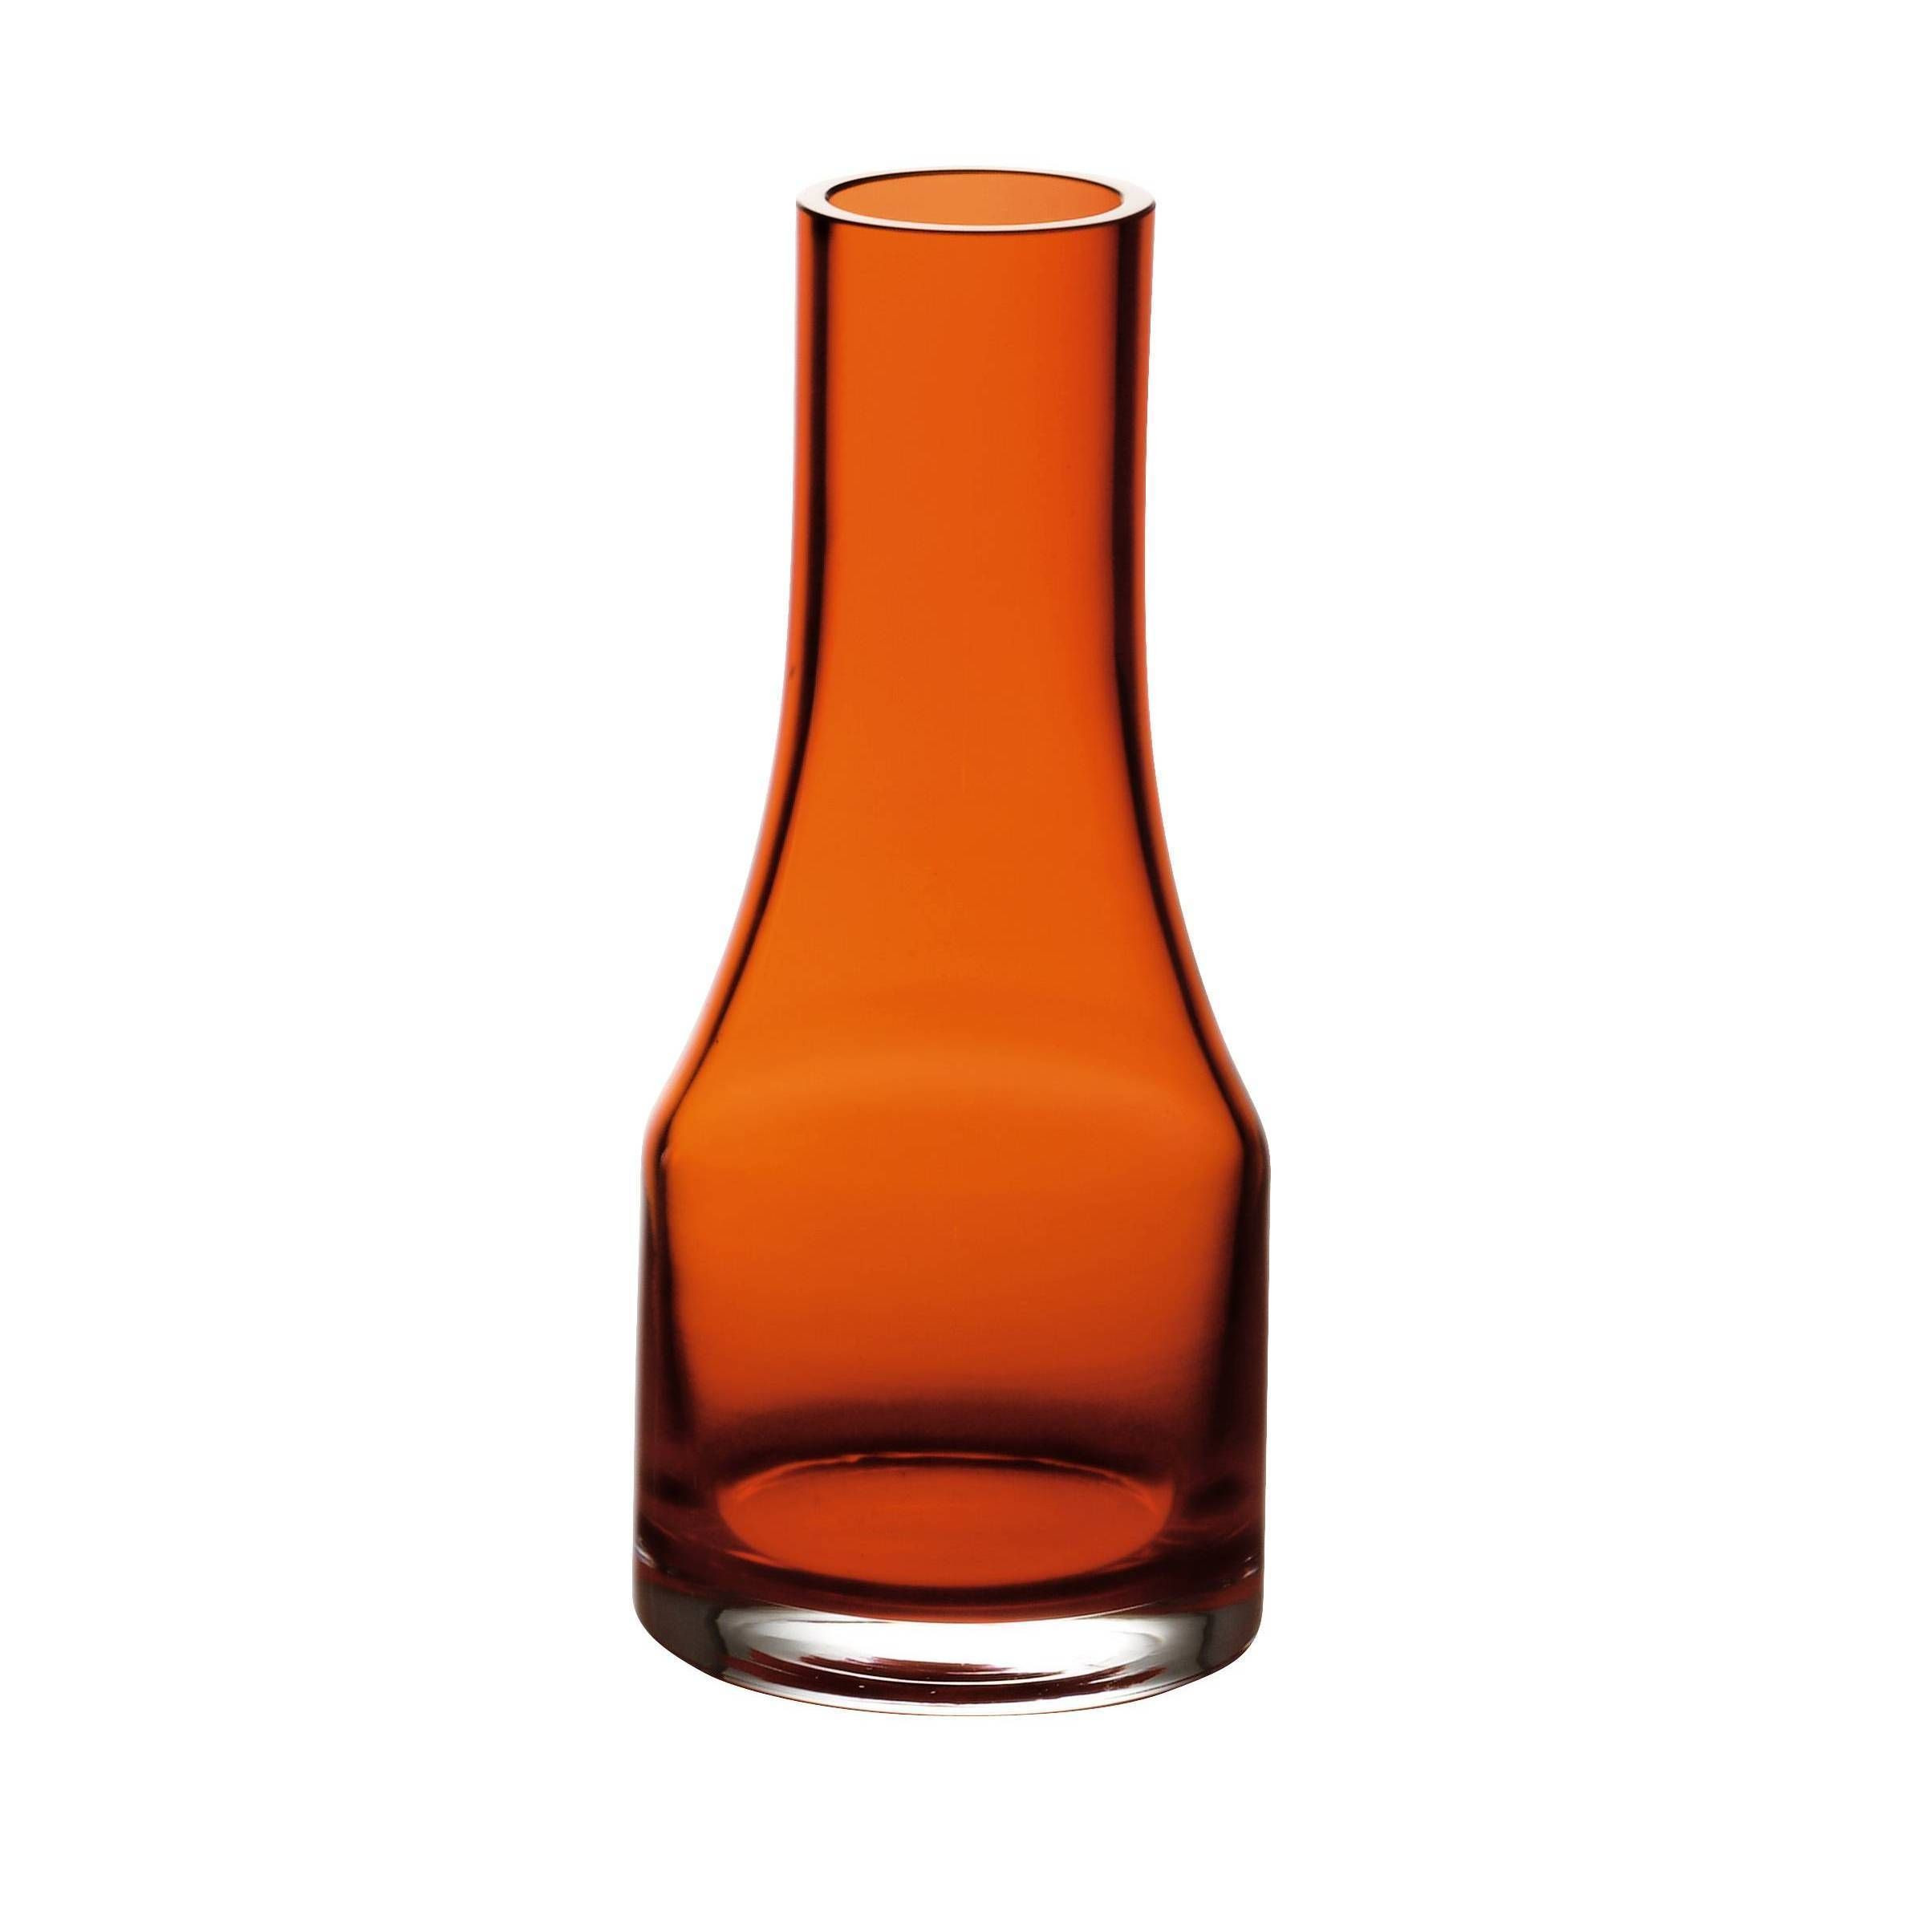 14 Awesome Recycled Glass Balloon Vase 2024 free download recycled glass balloon vase of majestic gifts orange 5 9 inch h glass vase orange products with majestic gifts orange 5 9 inch h glass vase orange